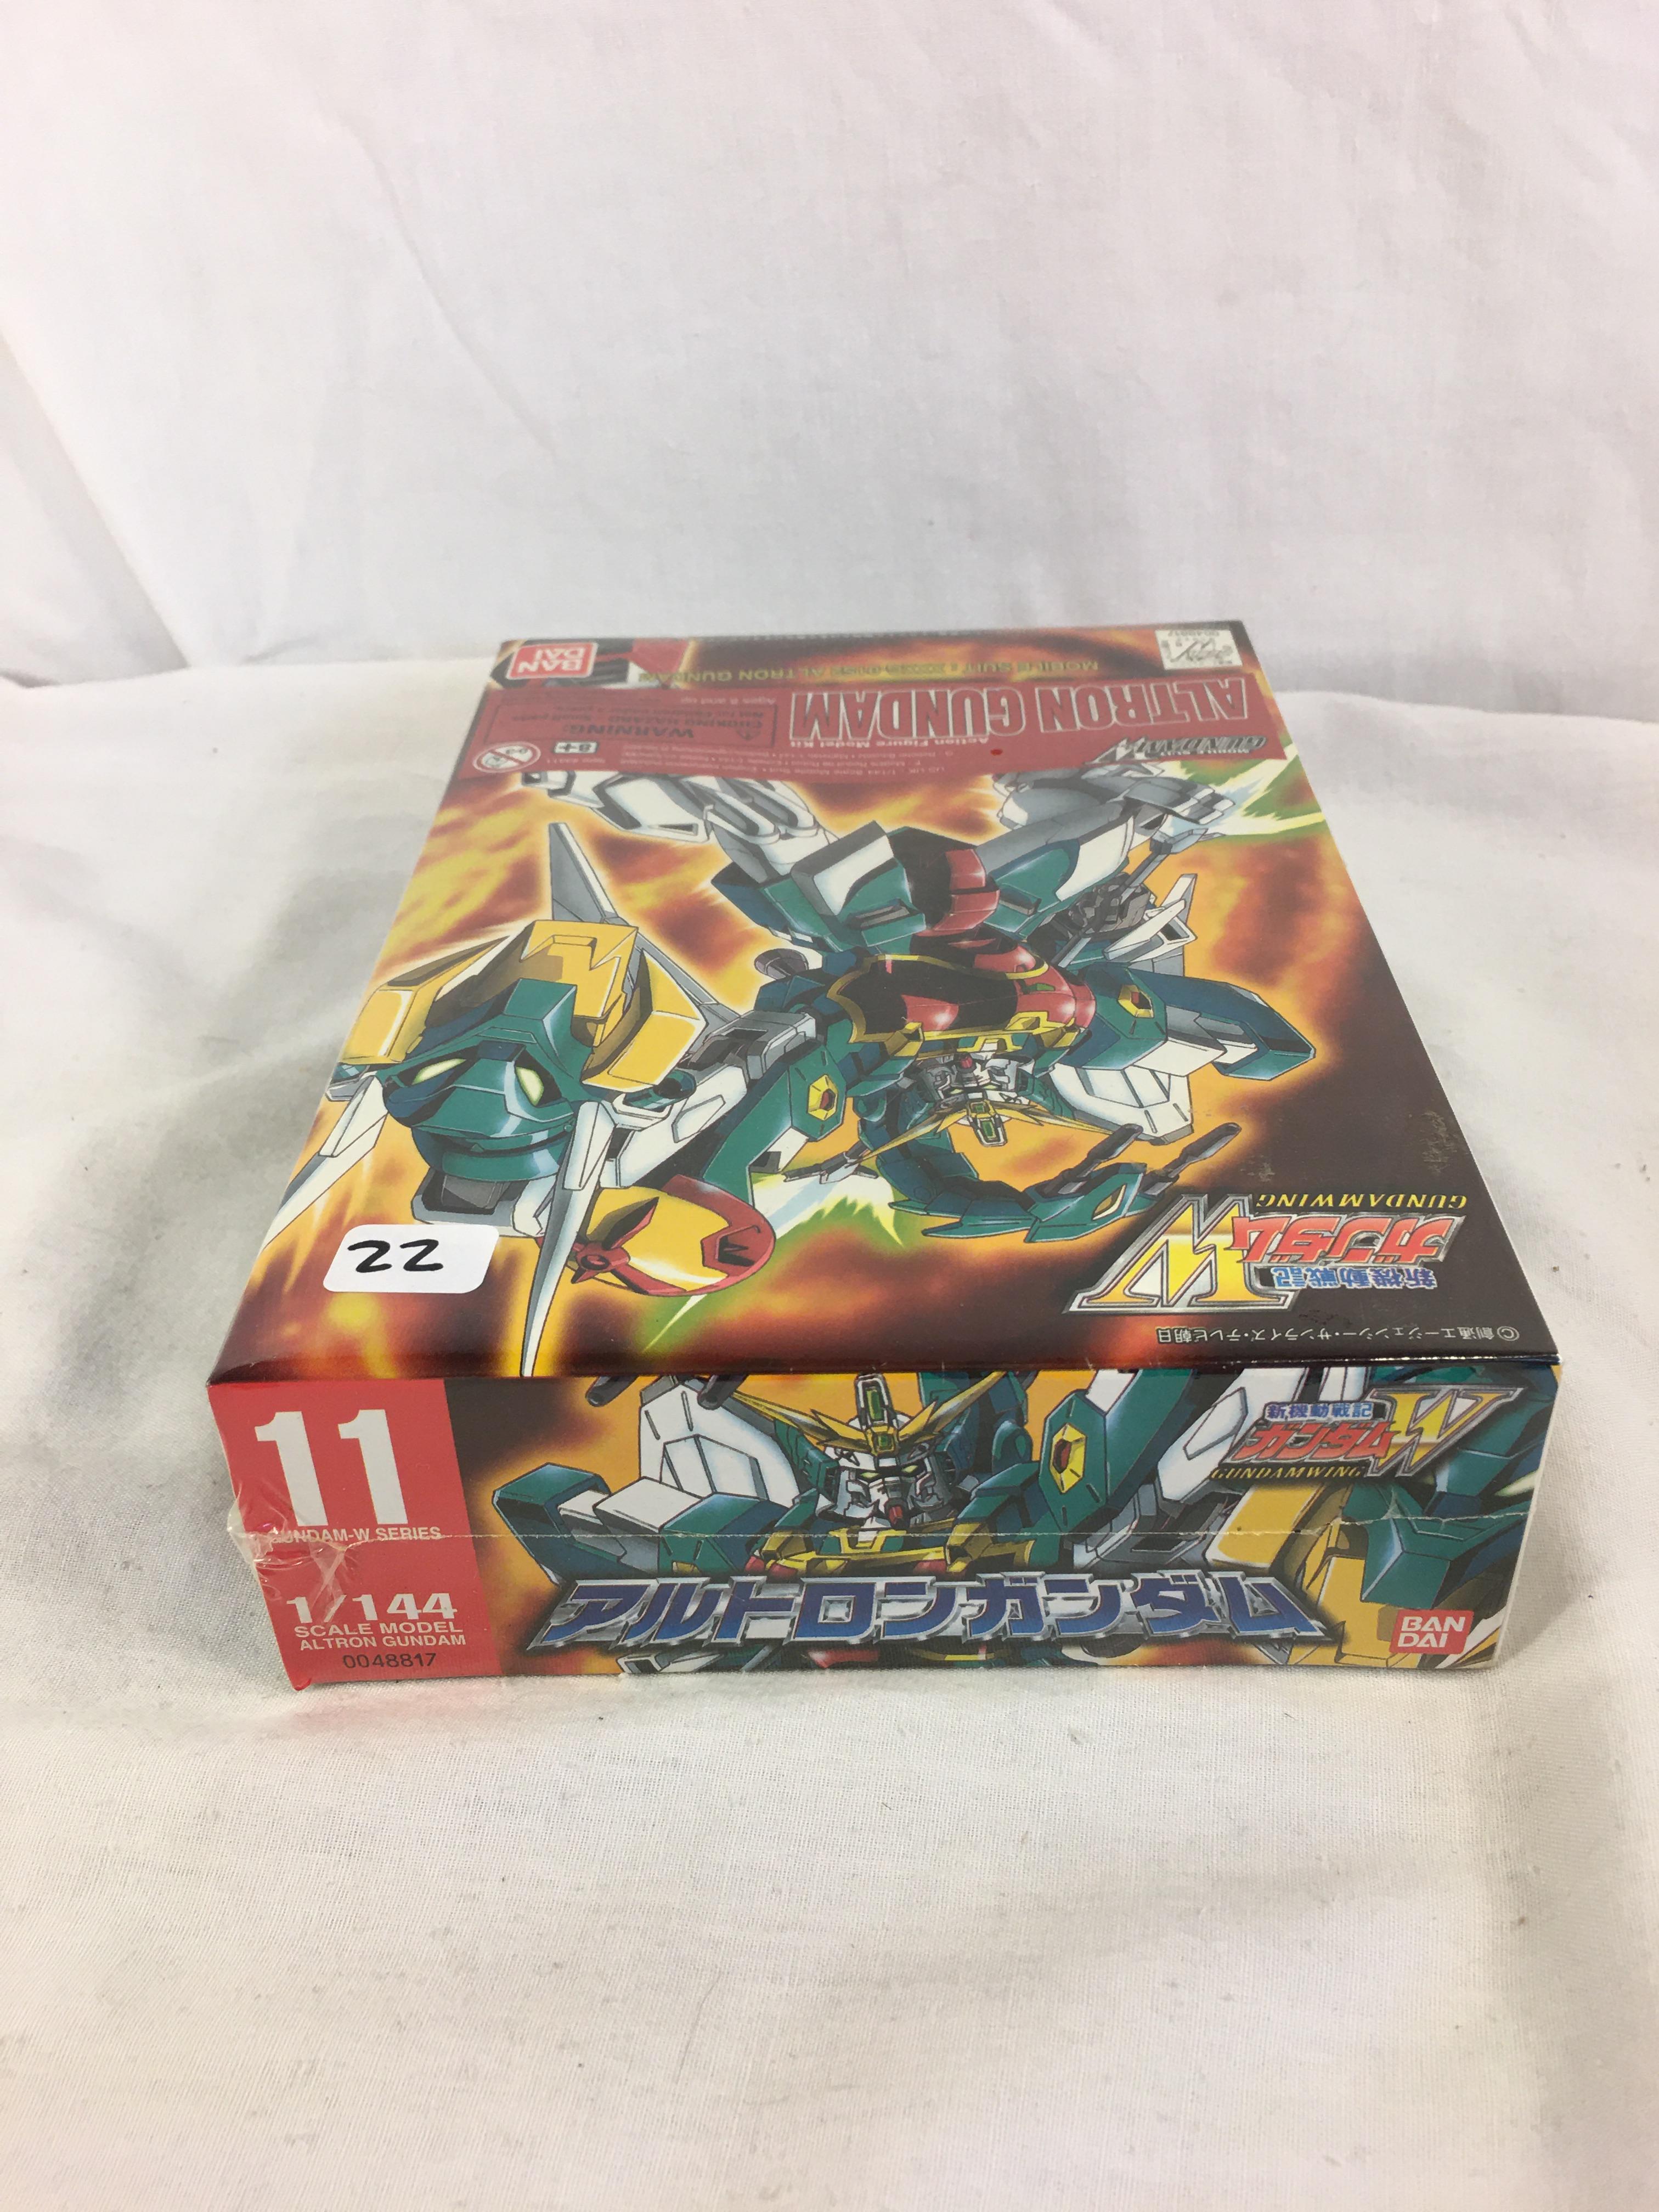 New Sealed Collector  Bandai Mobil Suit Wing Altron Gundam Action Figure Model Kit 8.5x6"